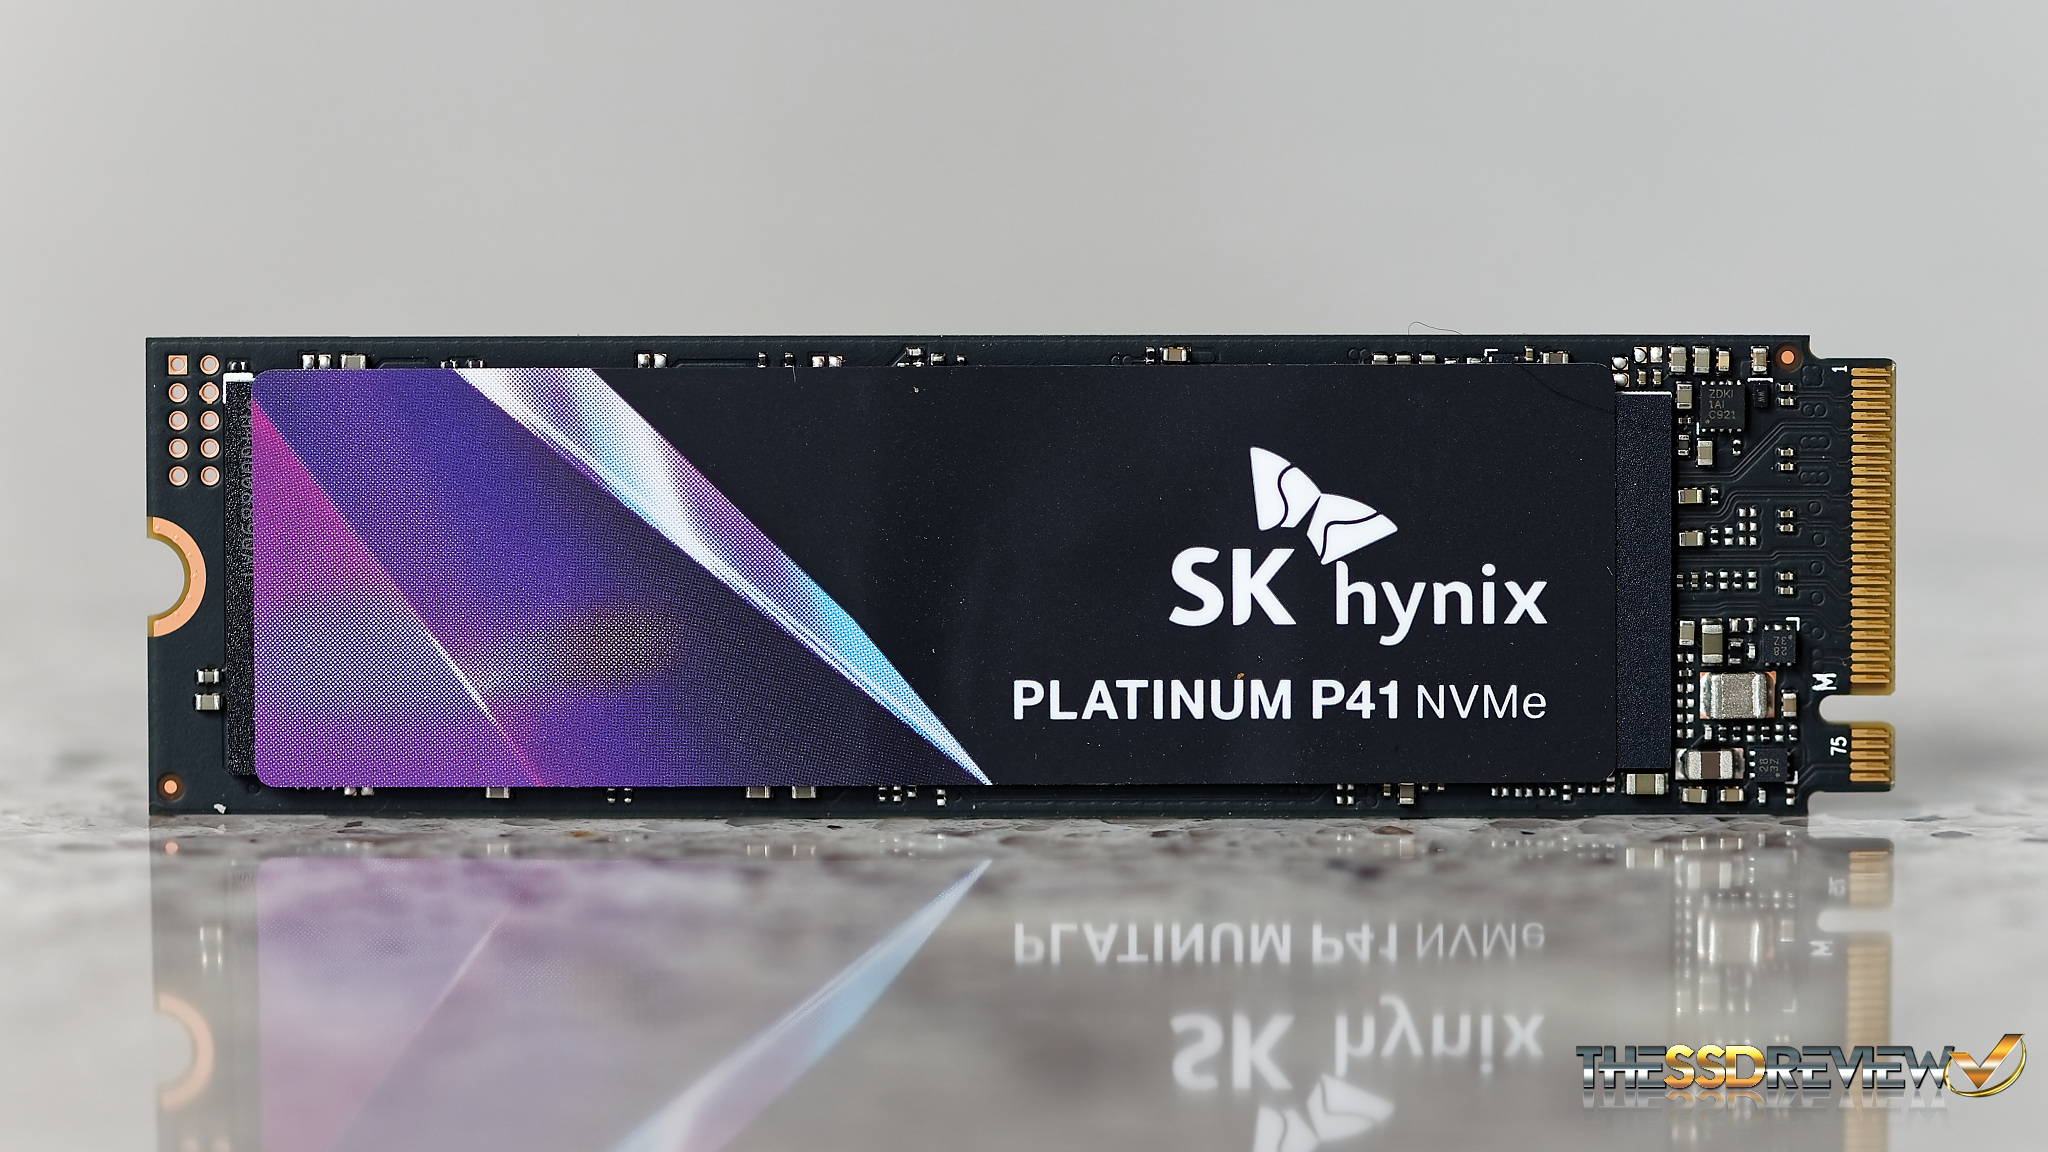 SK hynix Platinum P41 SSD Review - Can Gen4 Get Any Better than